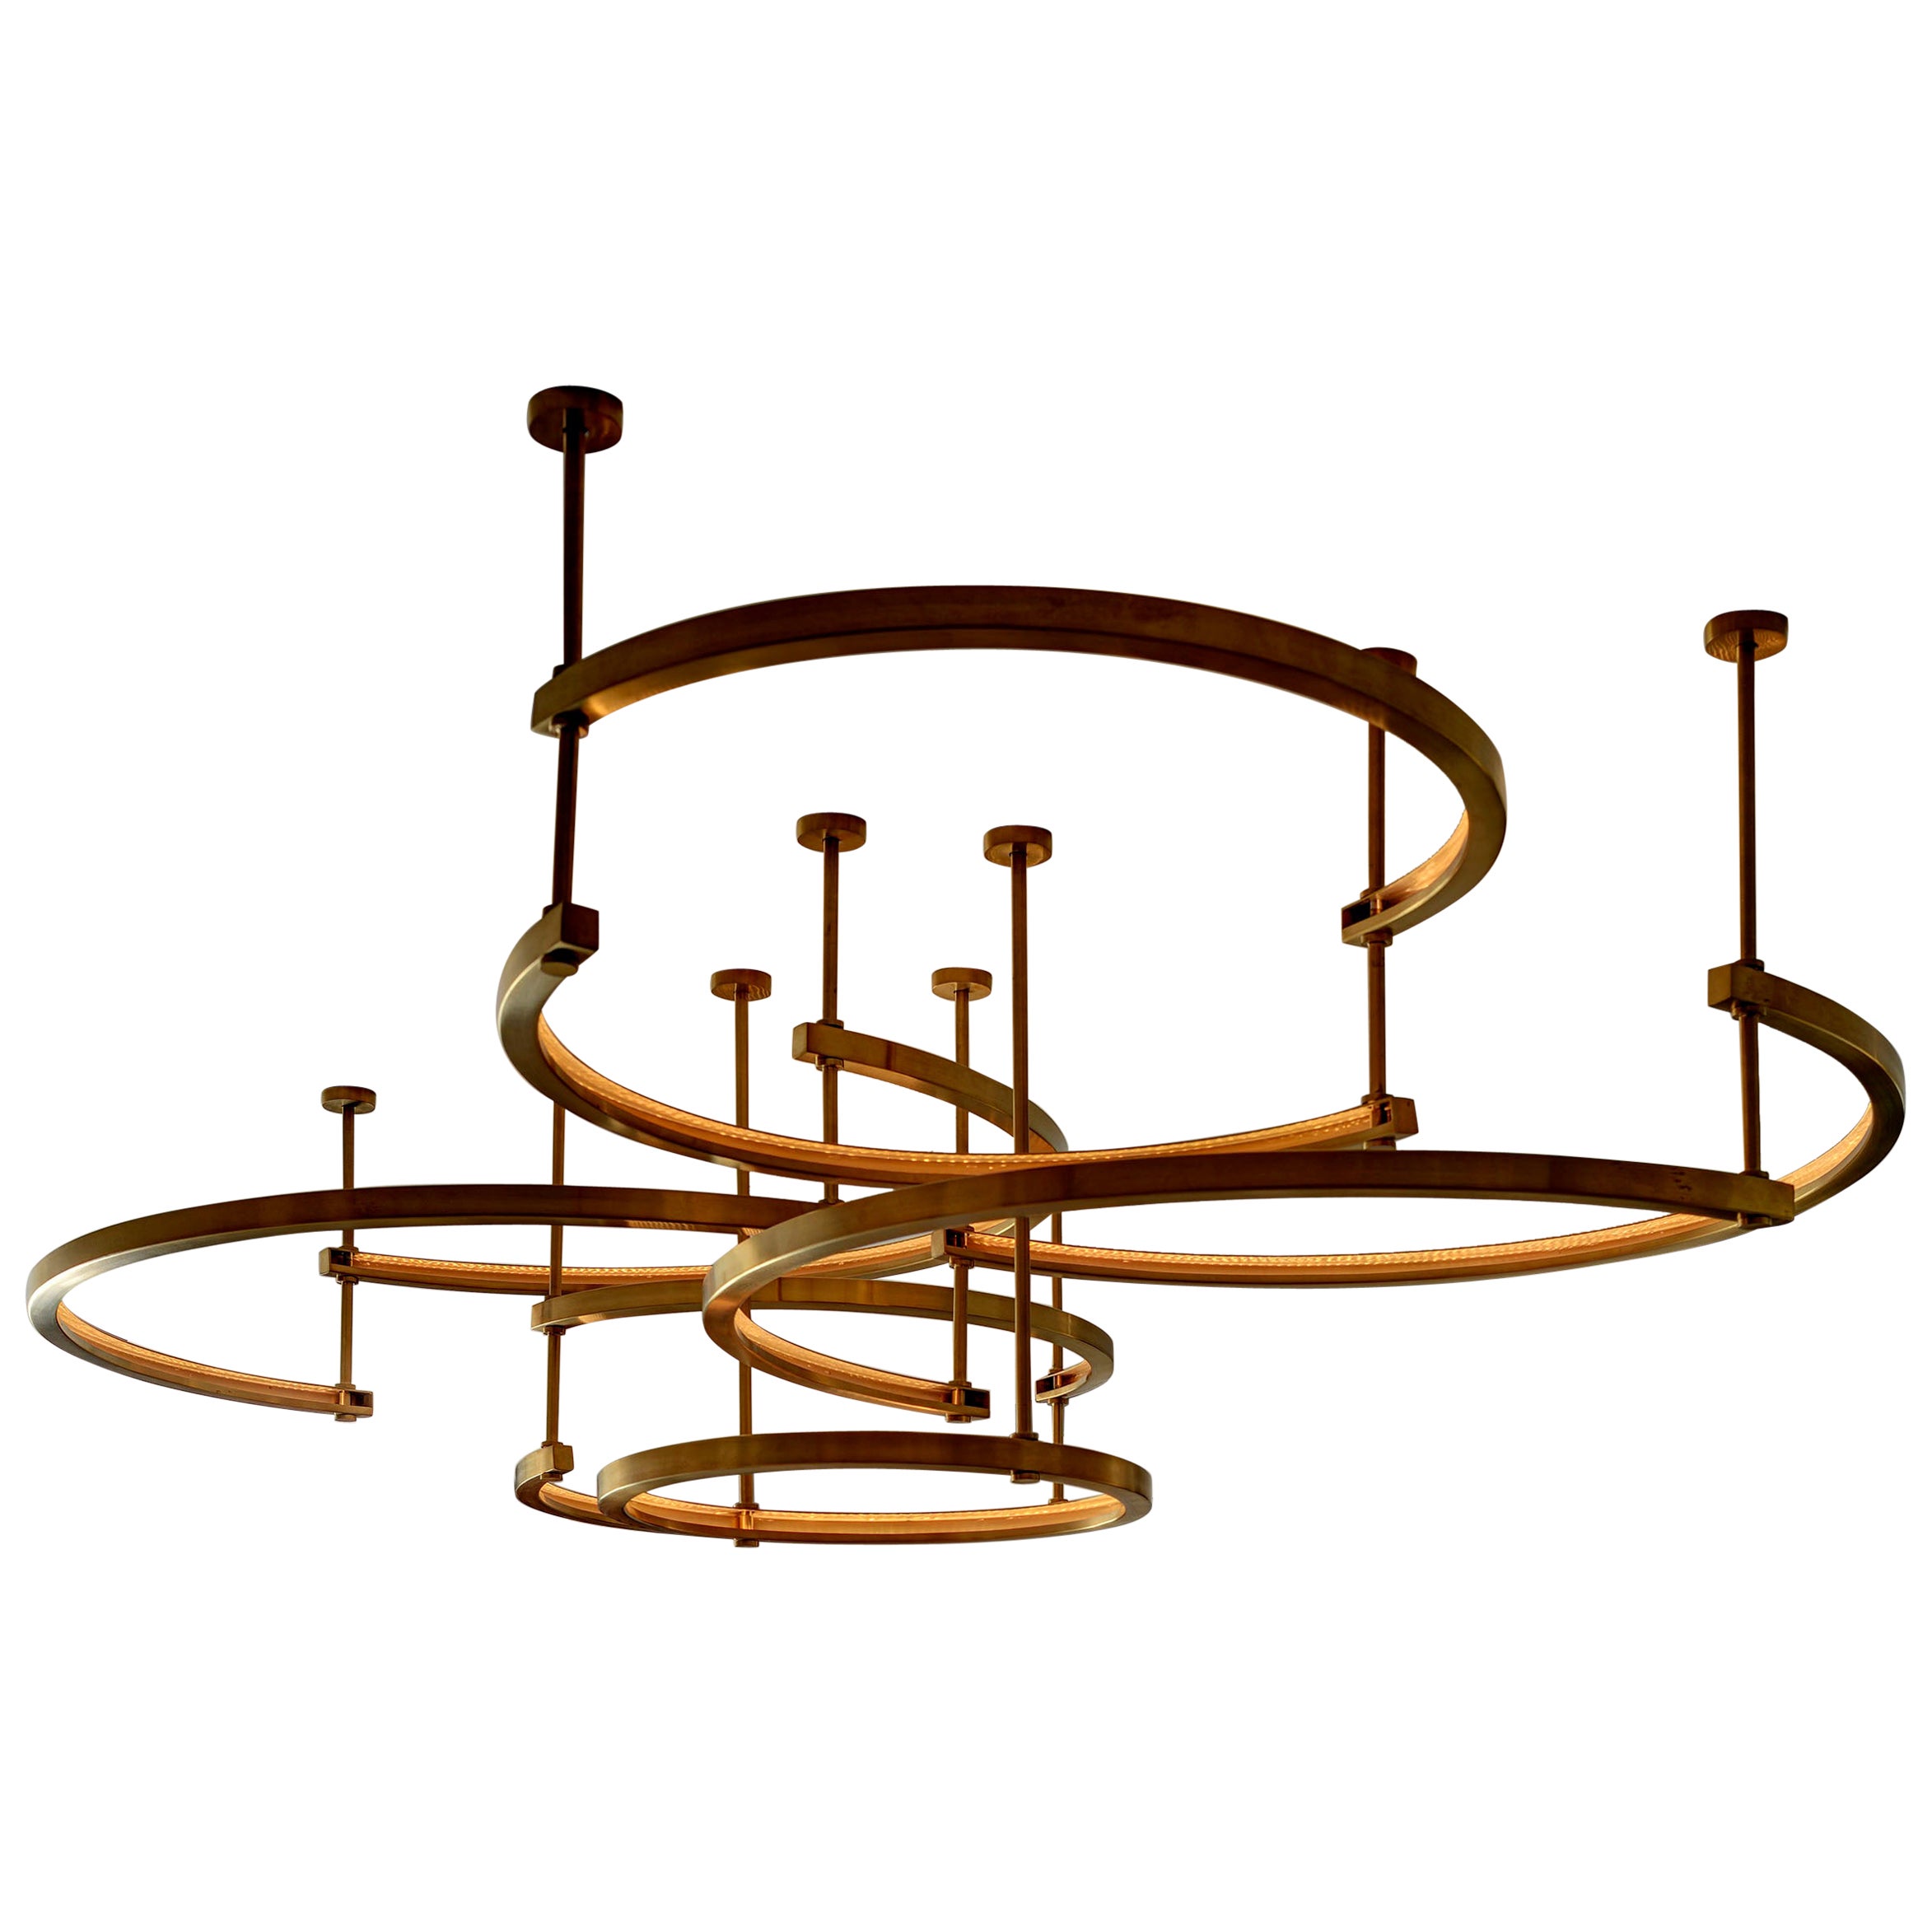 The Deconstructed Brass Ring Chandelier For Sale